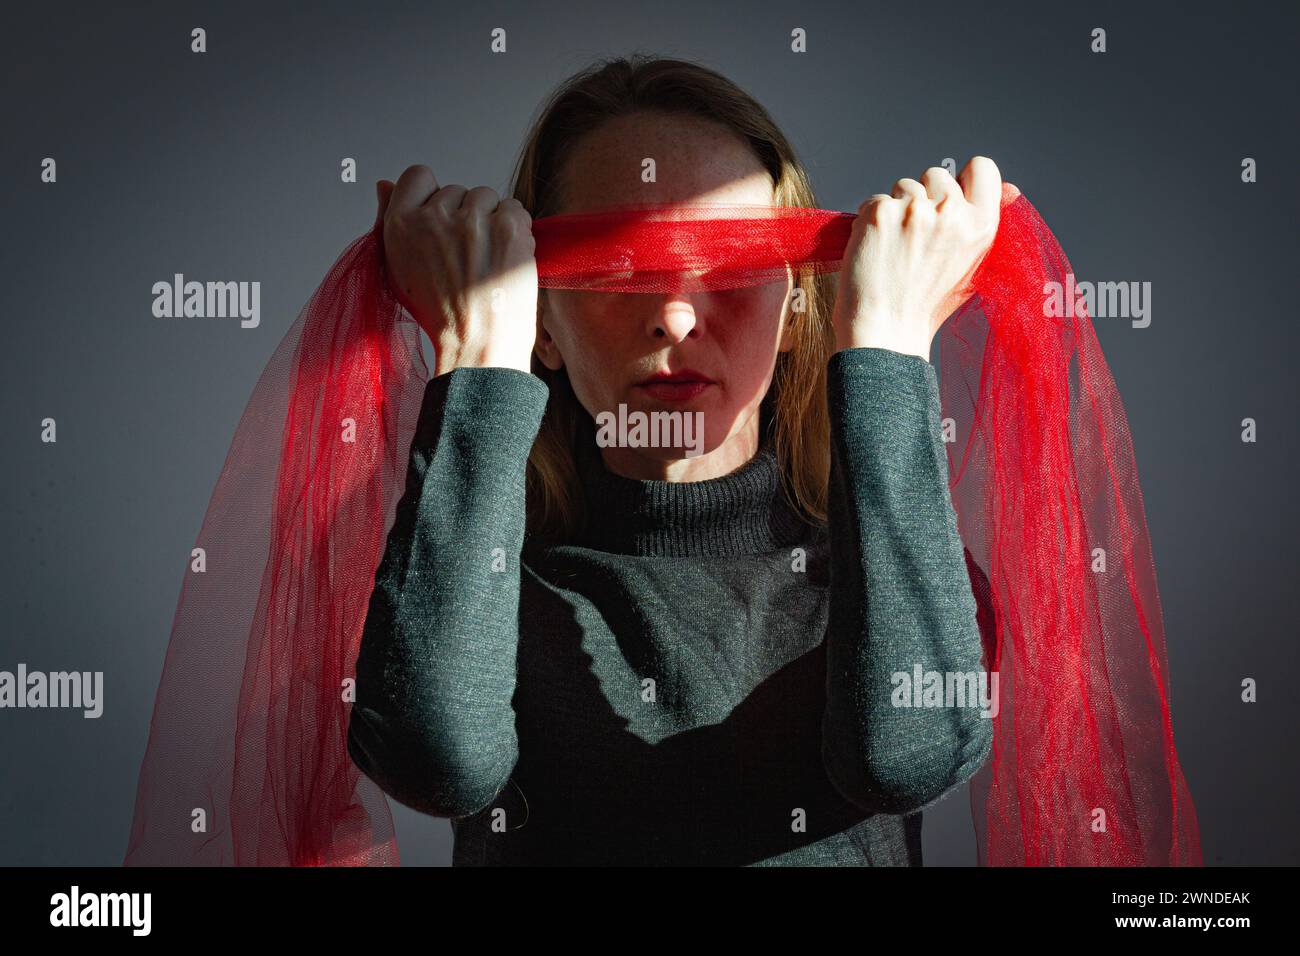 Visualization of a psychological problem. An adult young woman holds a bandage made of red transparent fabric over her eyes. Stock Photo